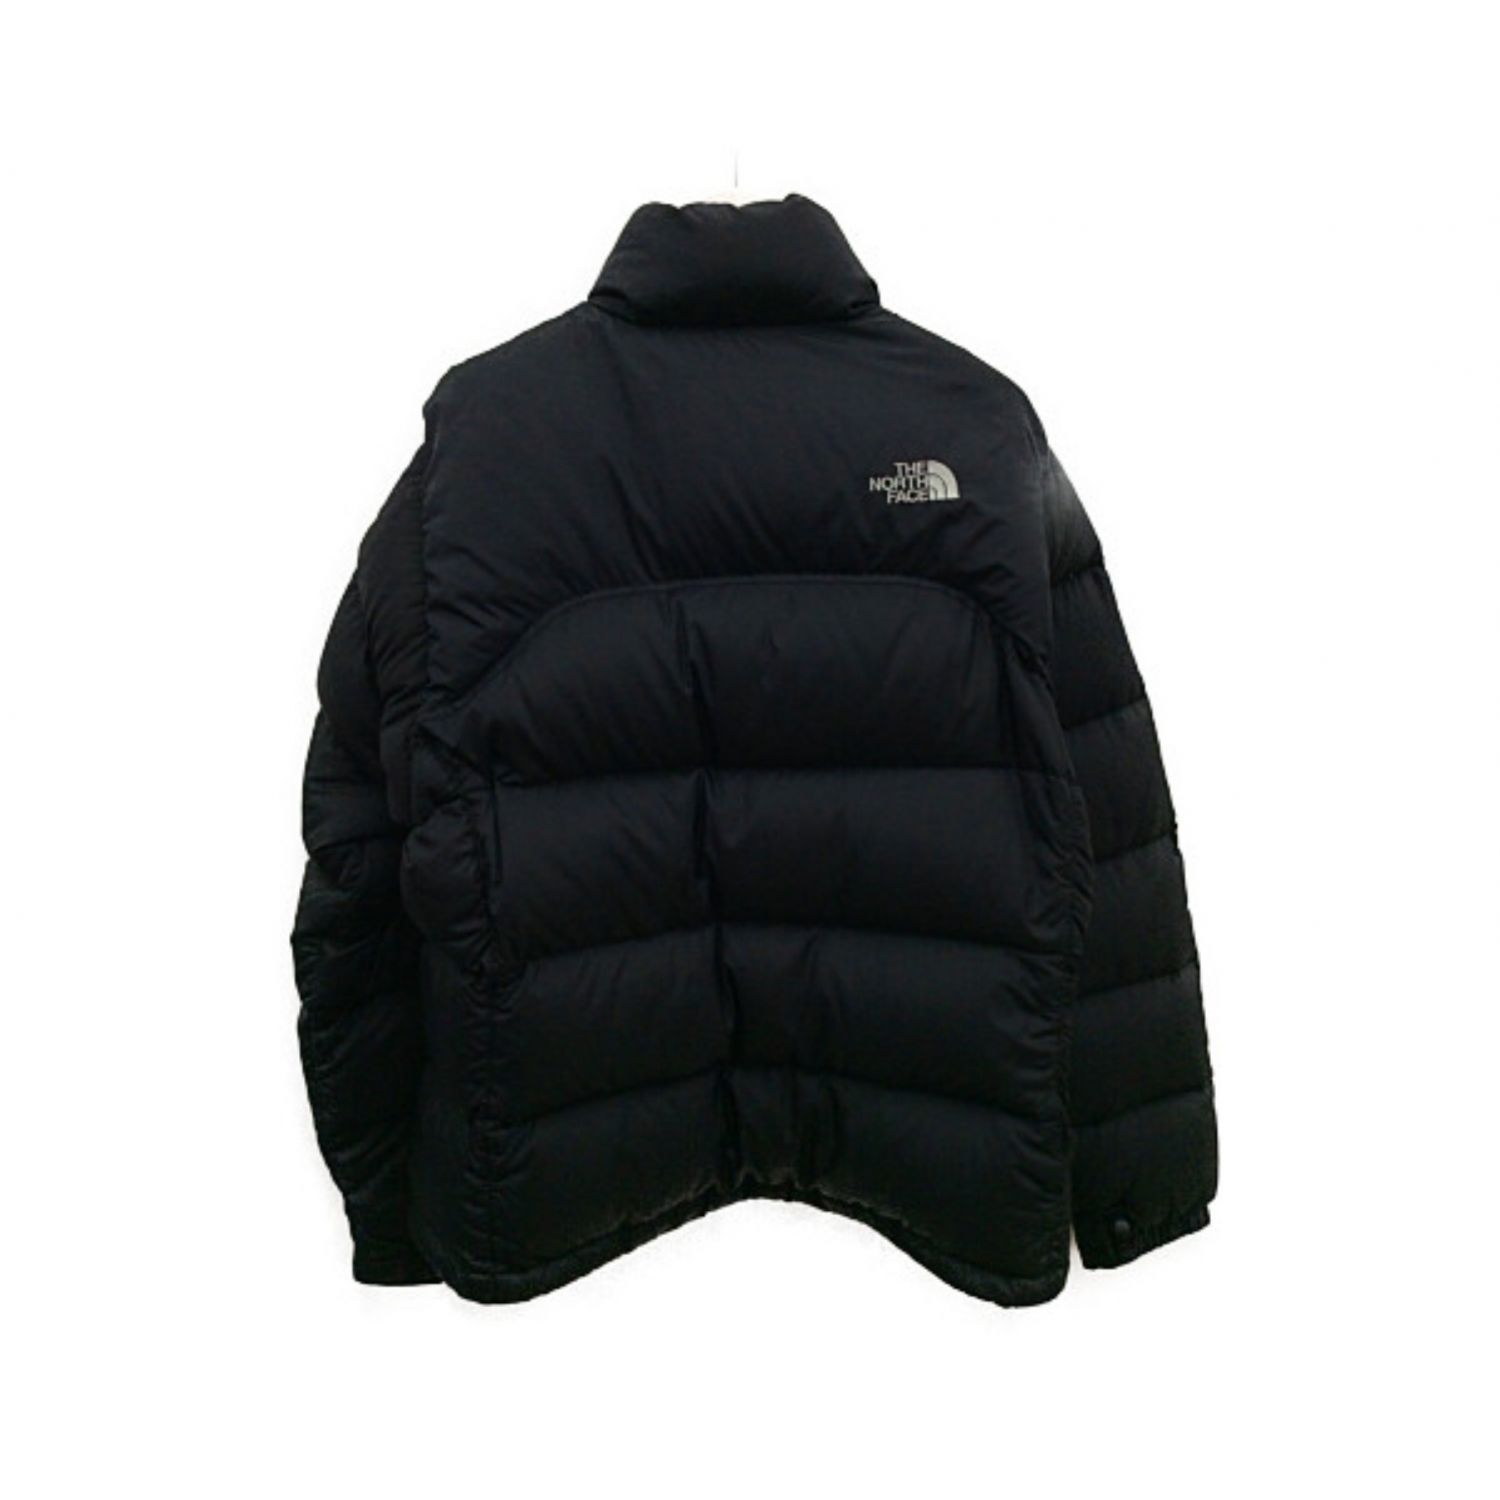 THE NORTH FACE - THE NORTH FACE ザノースフェイス 22AW NUPTSE